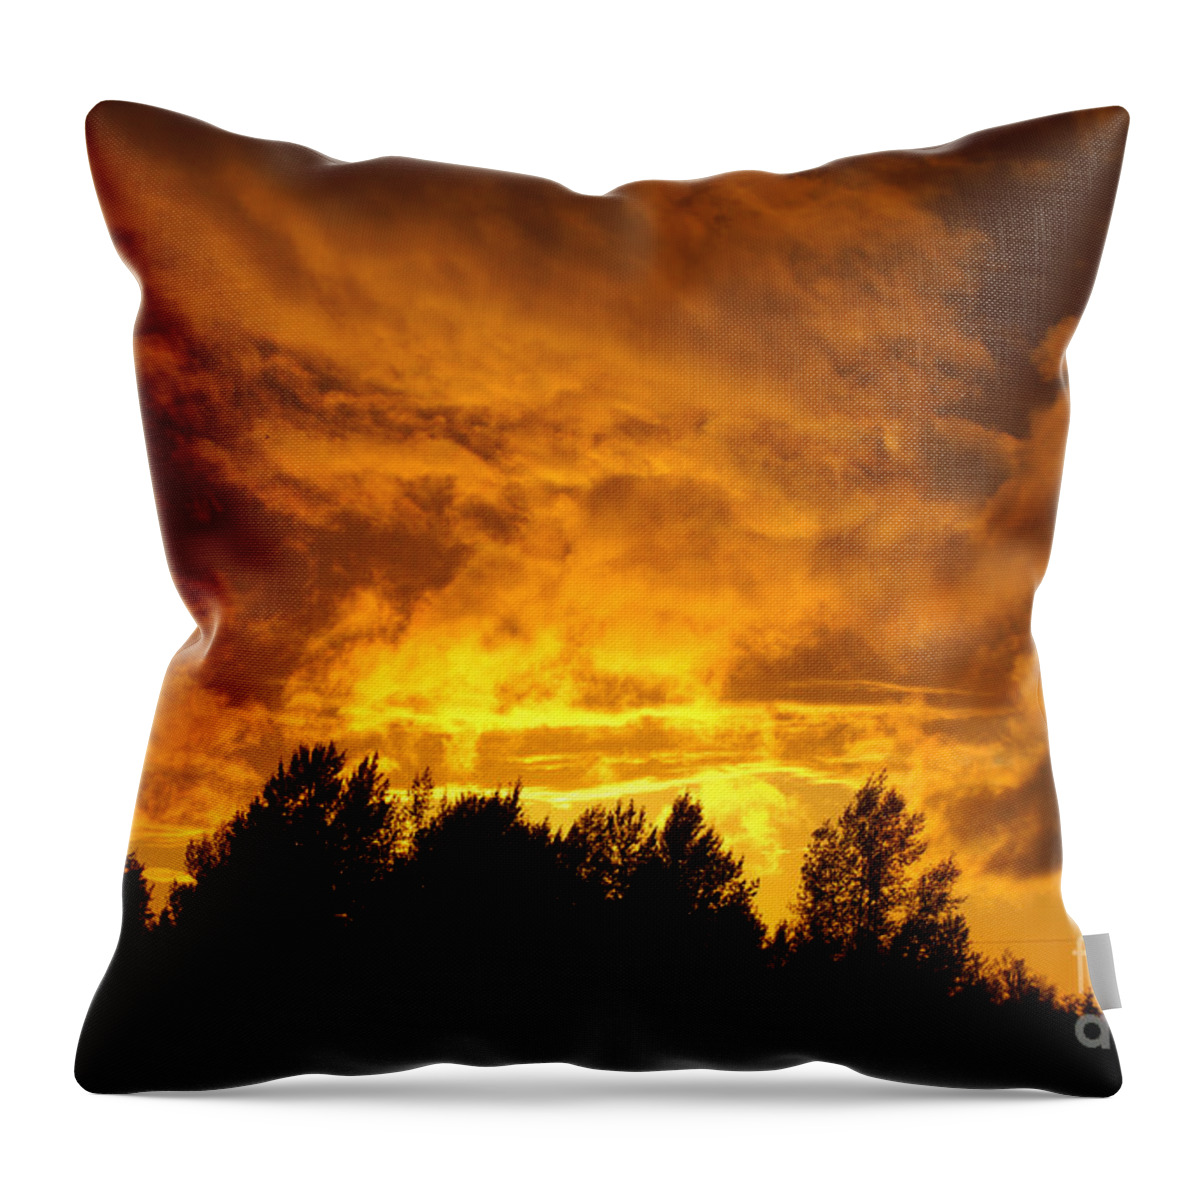 Storms Throw Pillow featuring the photograph Orange Stormy Skies by Randy Harris